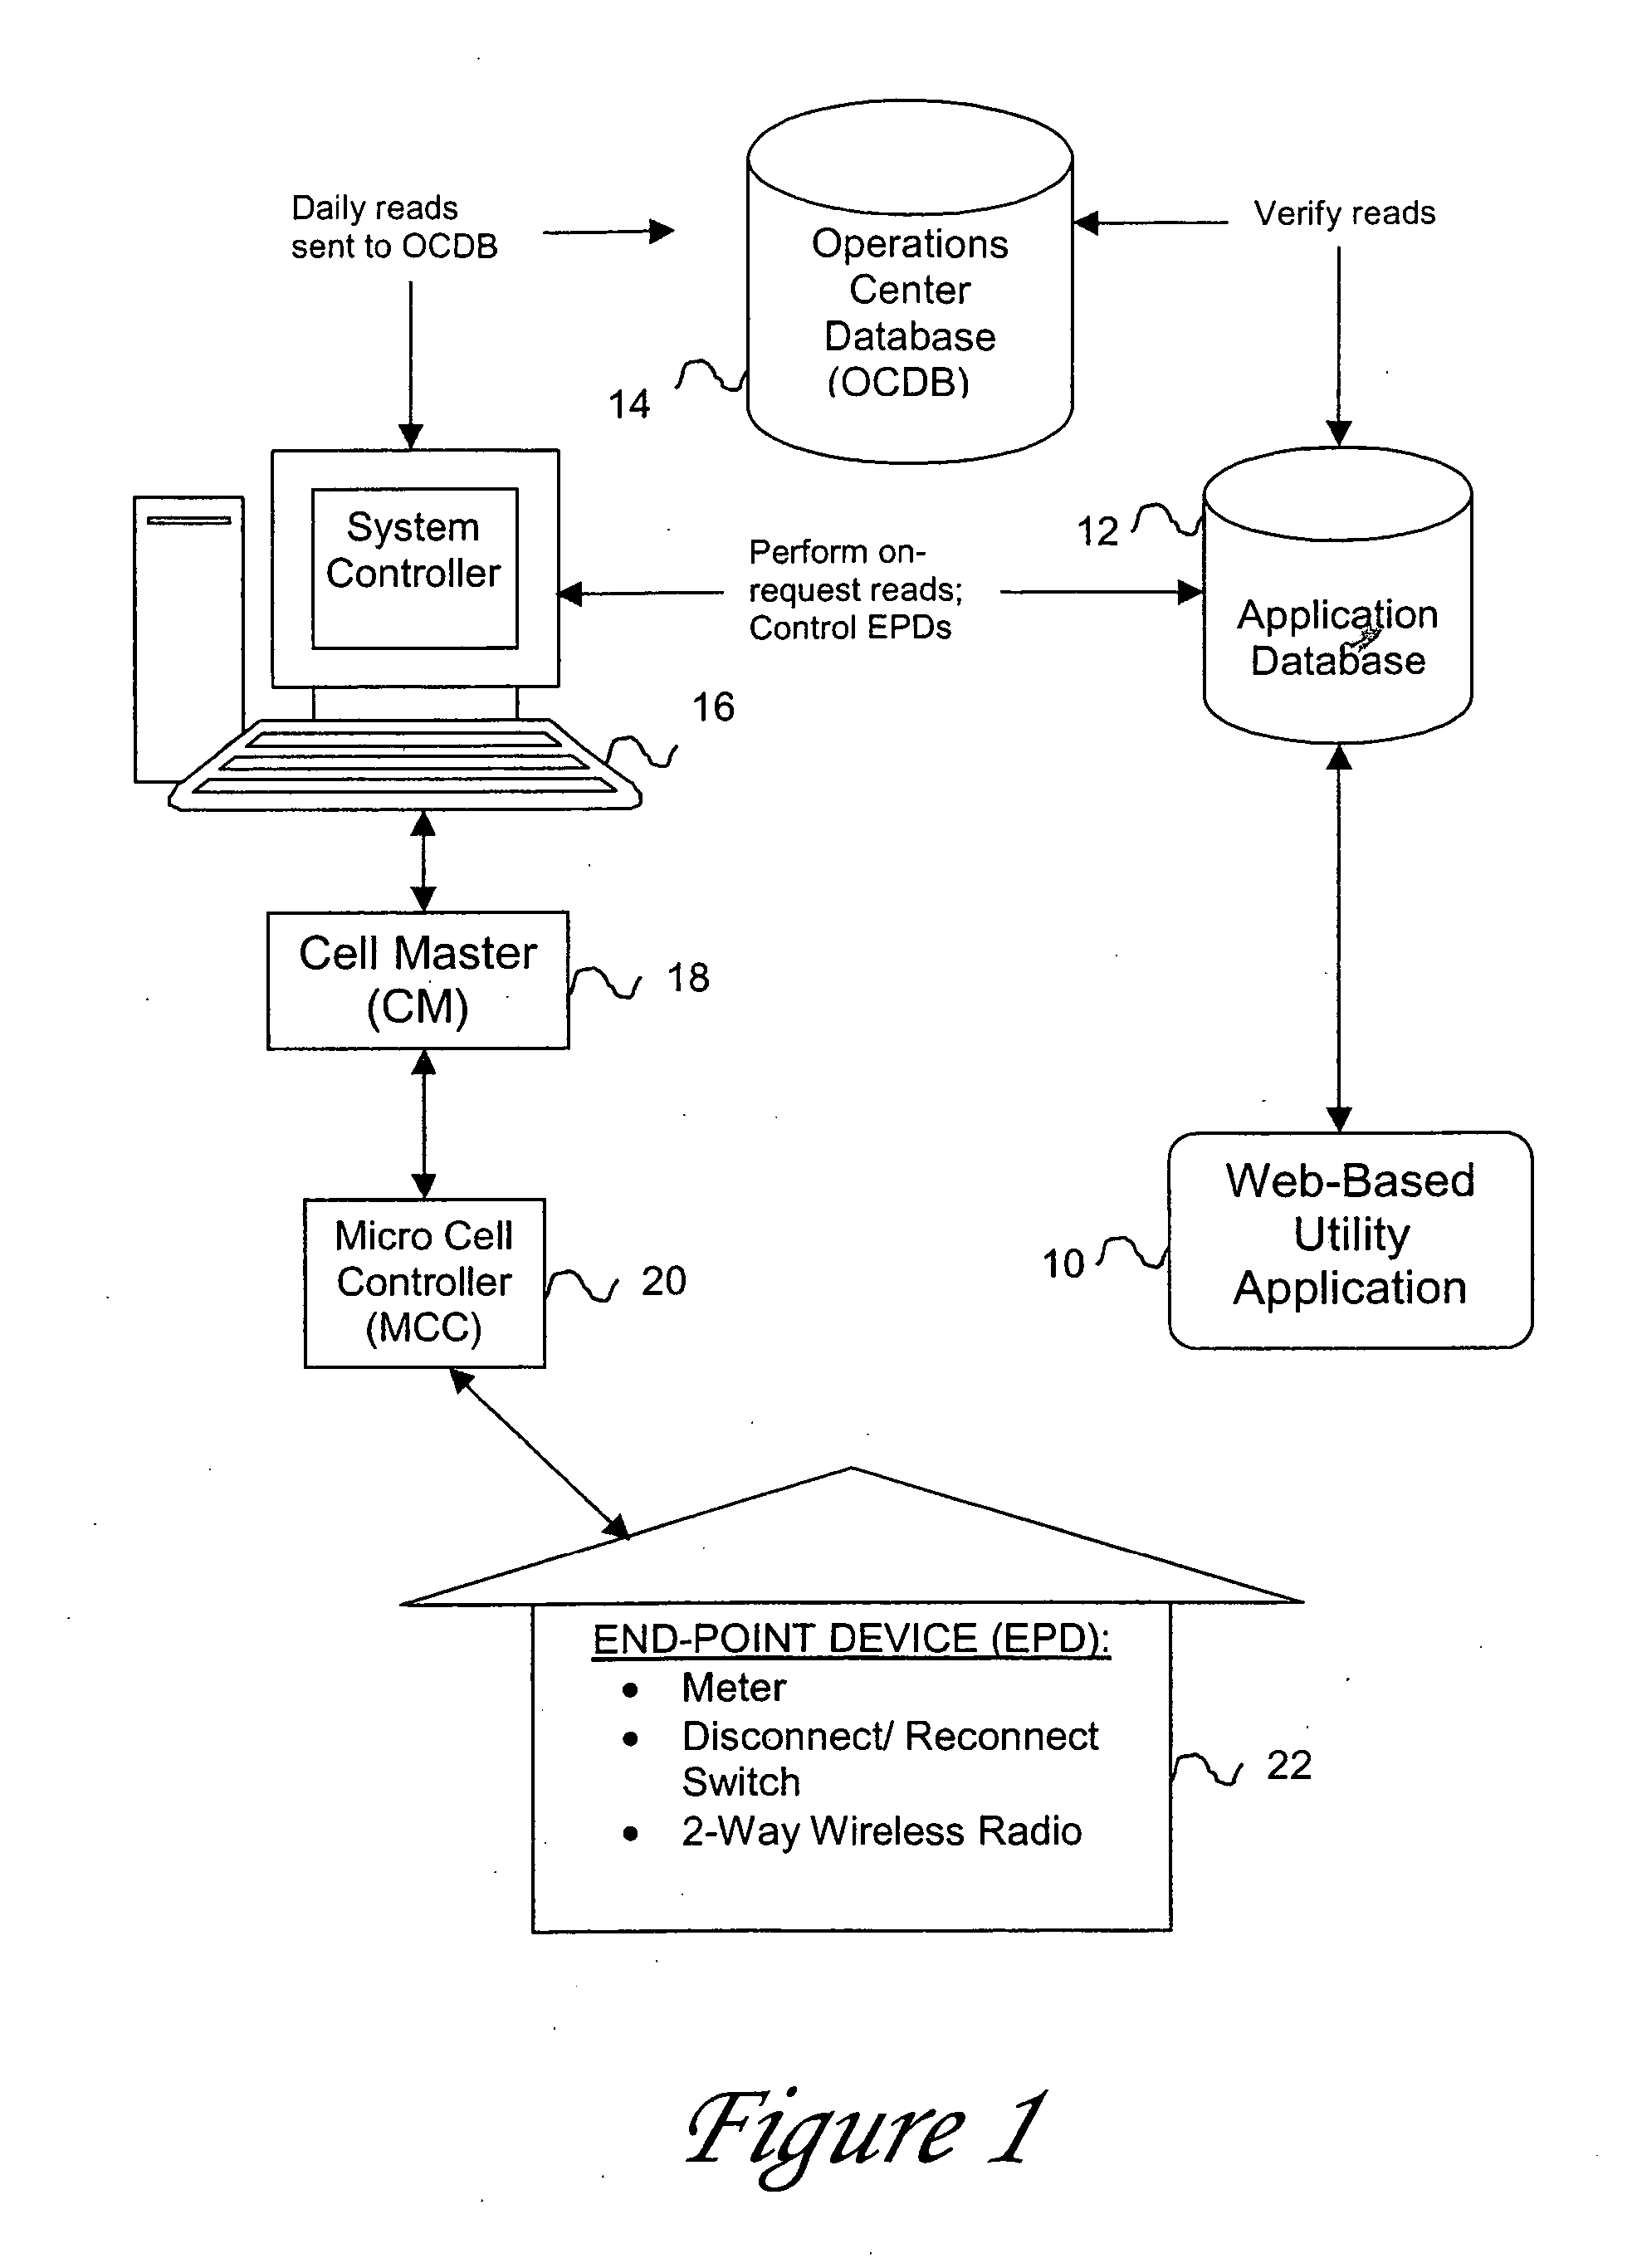 Interactive system for managing and remotely connecting customer utility loads